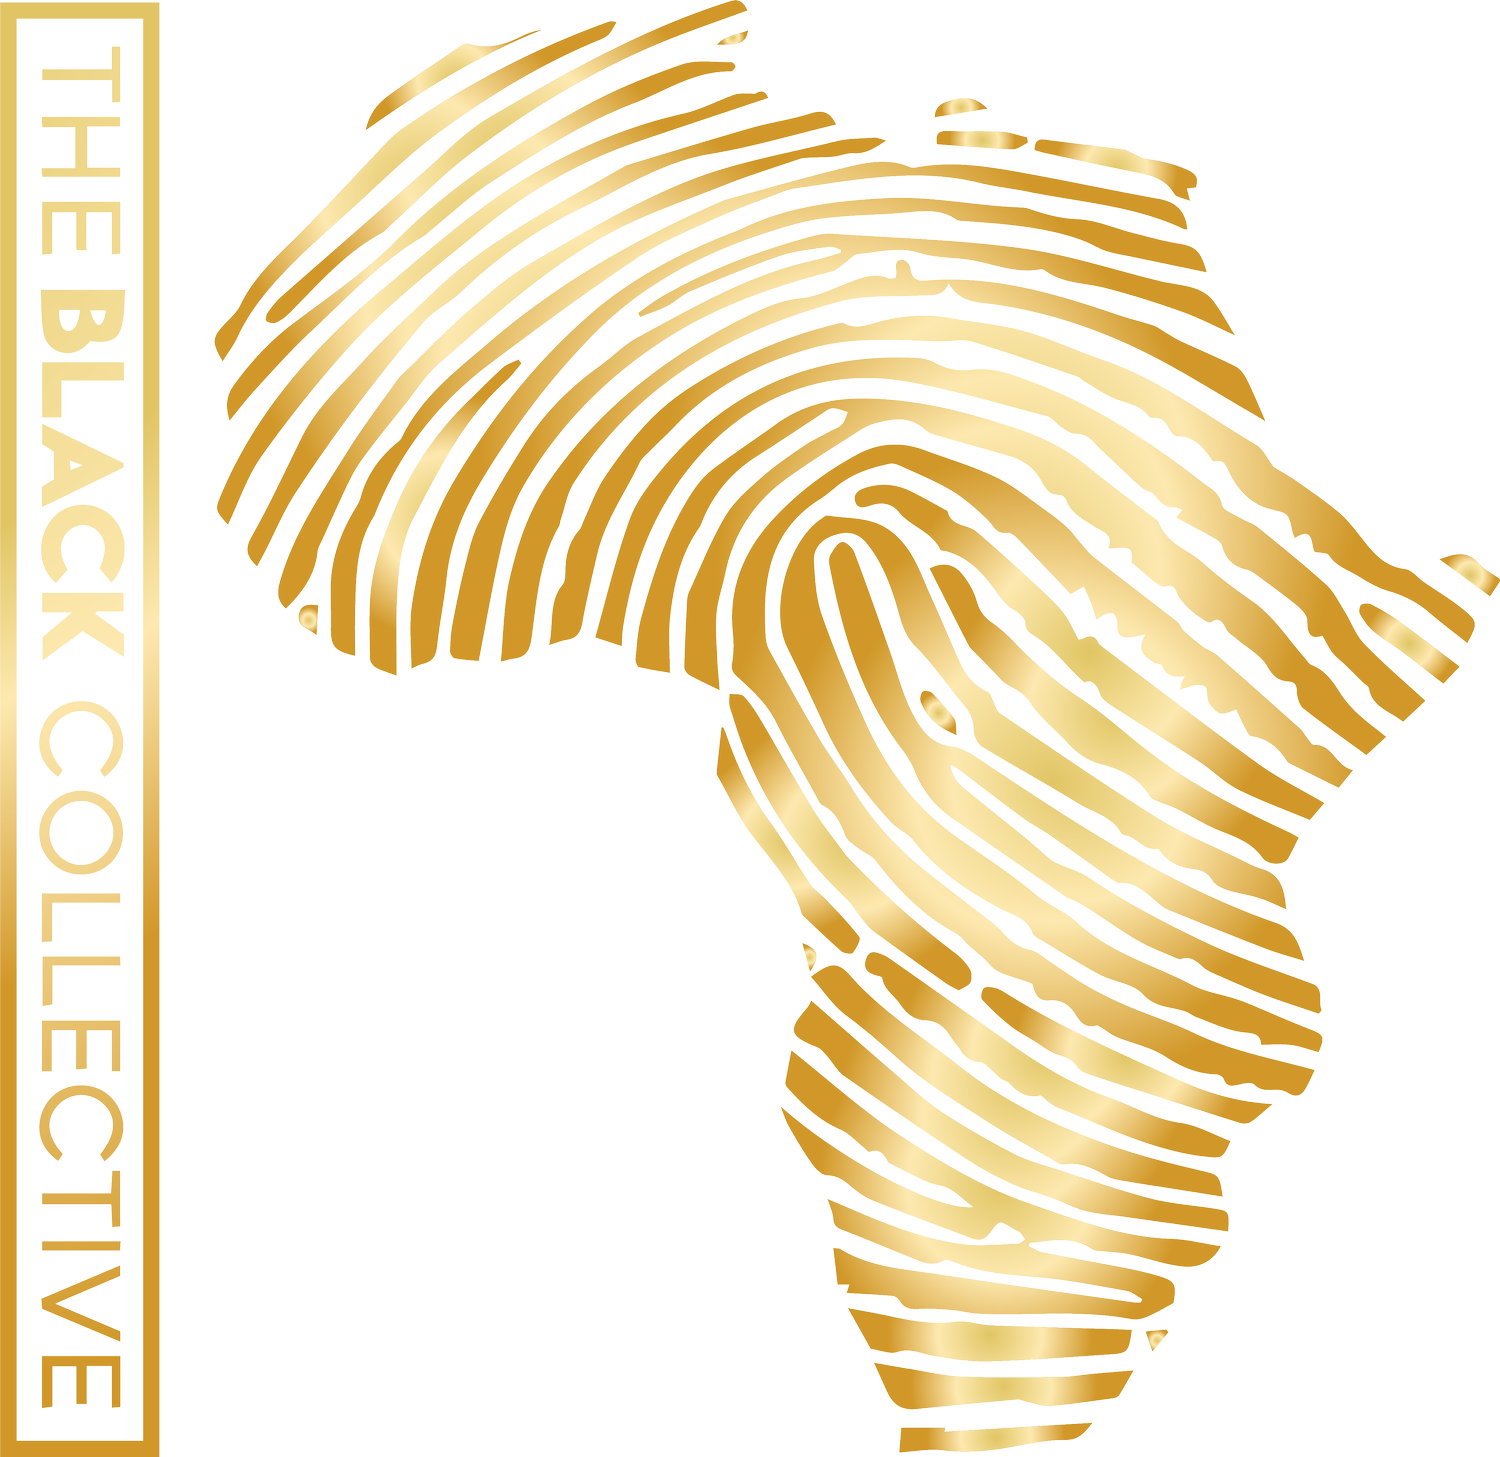 www.theblkcollective.org